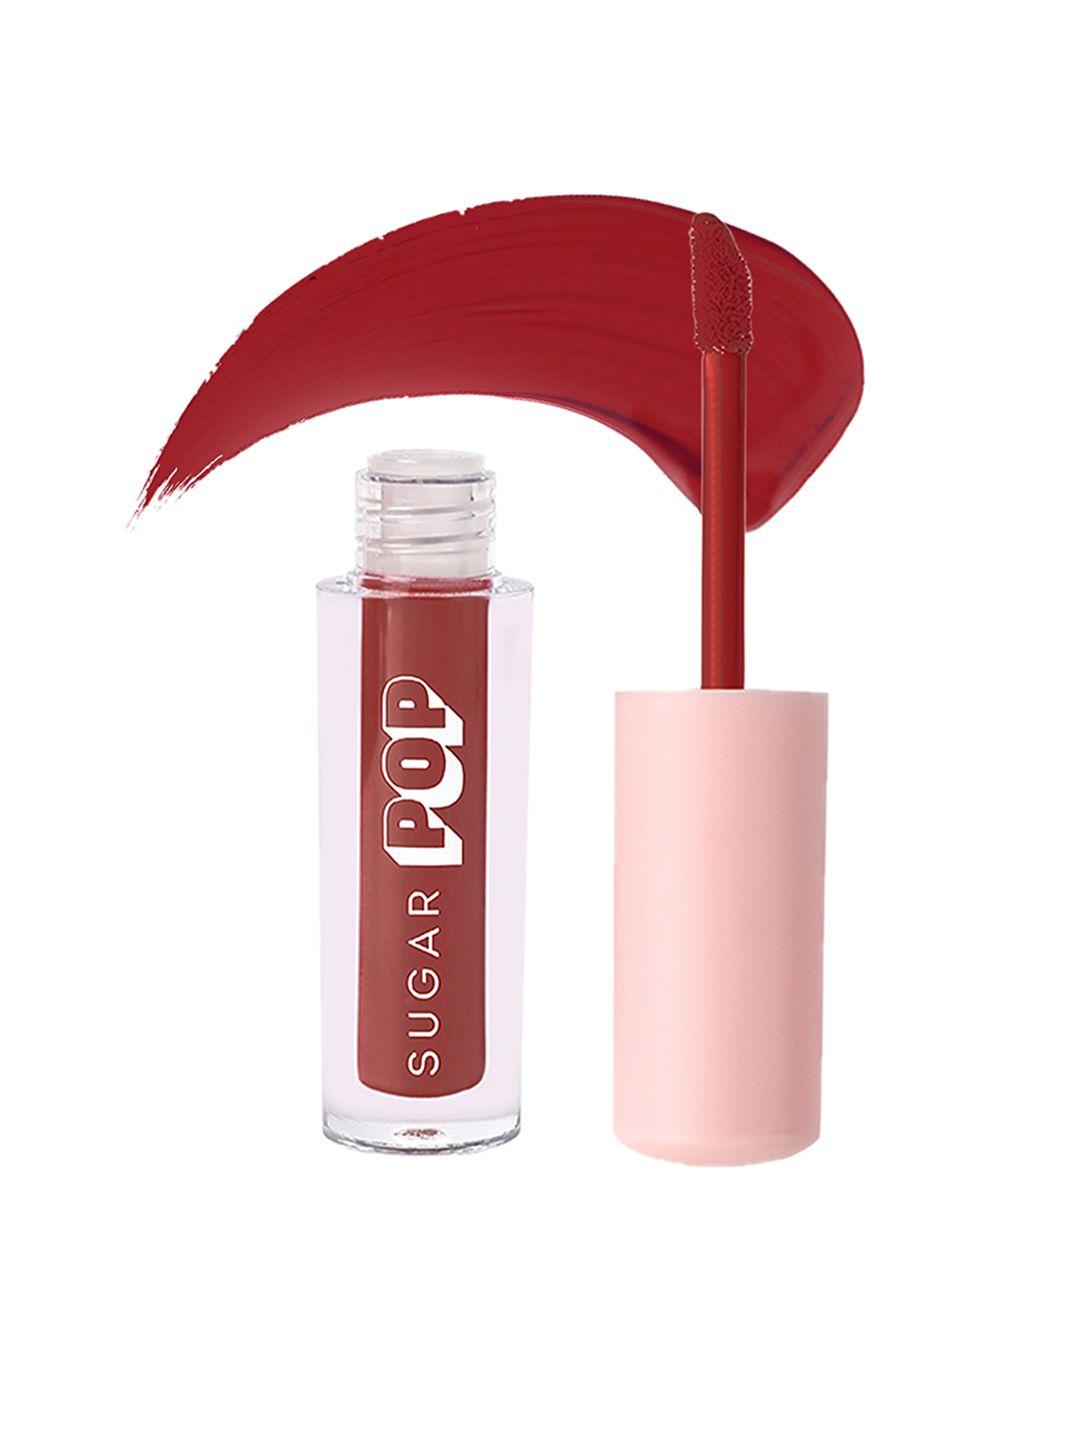 sugar pop 8 hour stay non-drying & smudge proof matte lipcolour 1.6 ml - mahogany 05